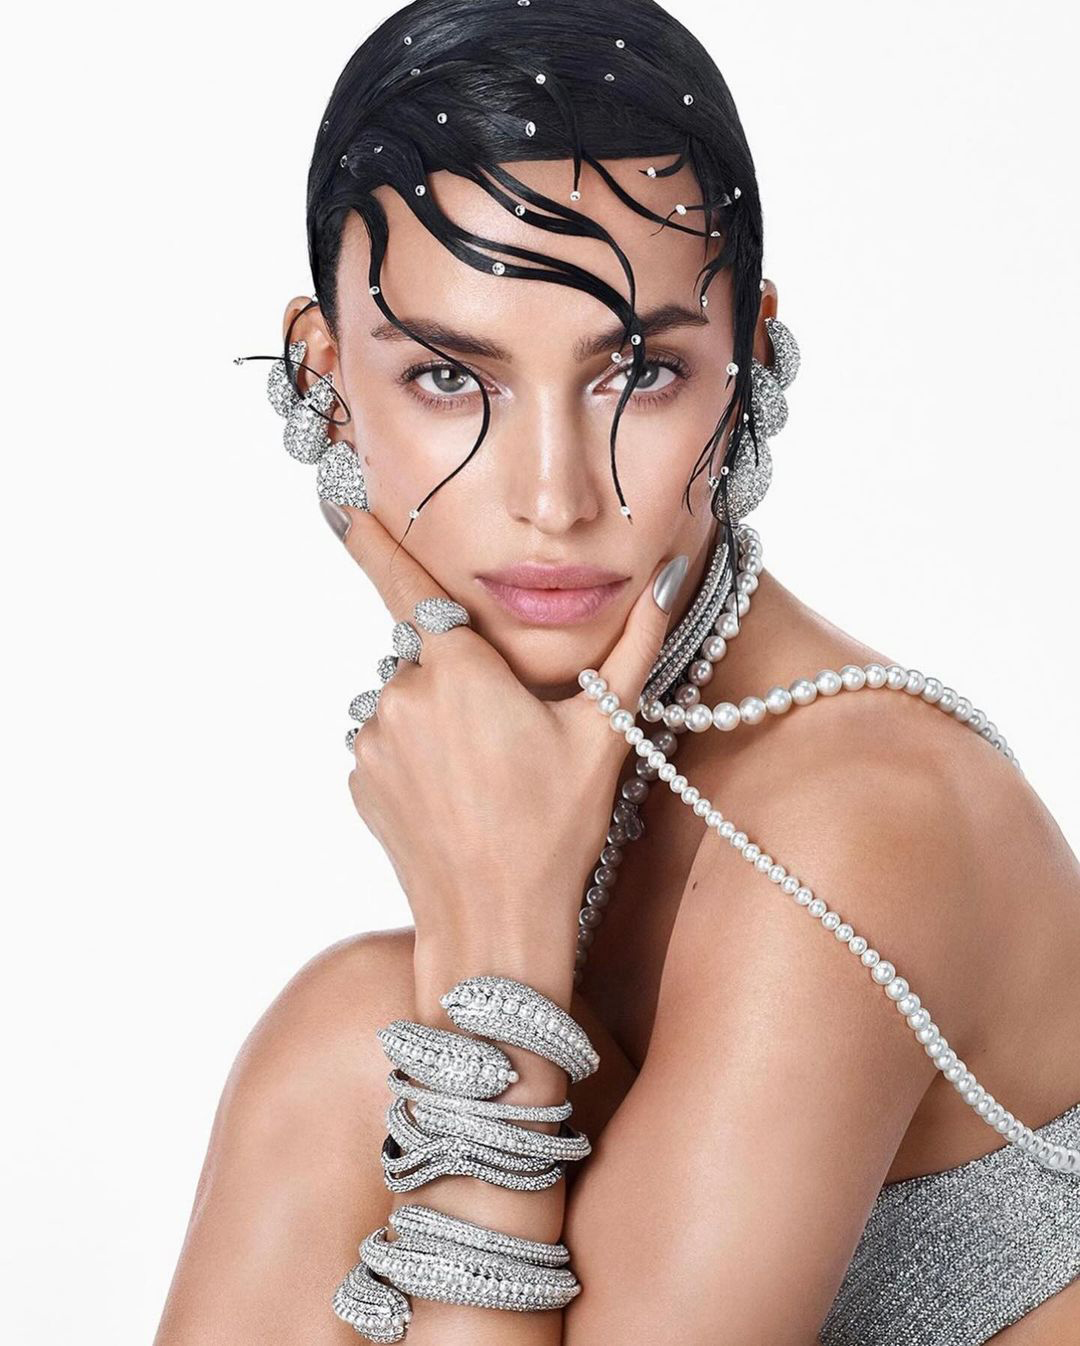 Irina shared photos and videos on Instagram to promote the eye-catching campaign as she posed in the unique garments